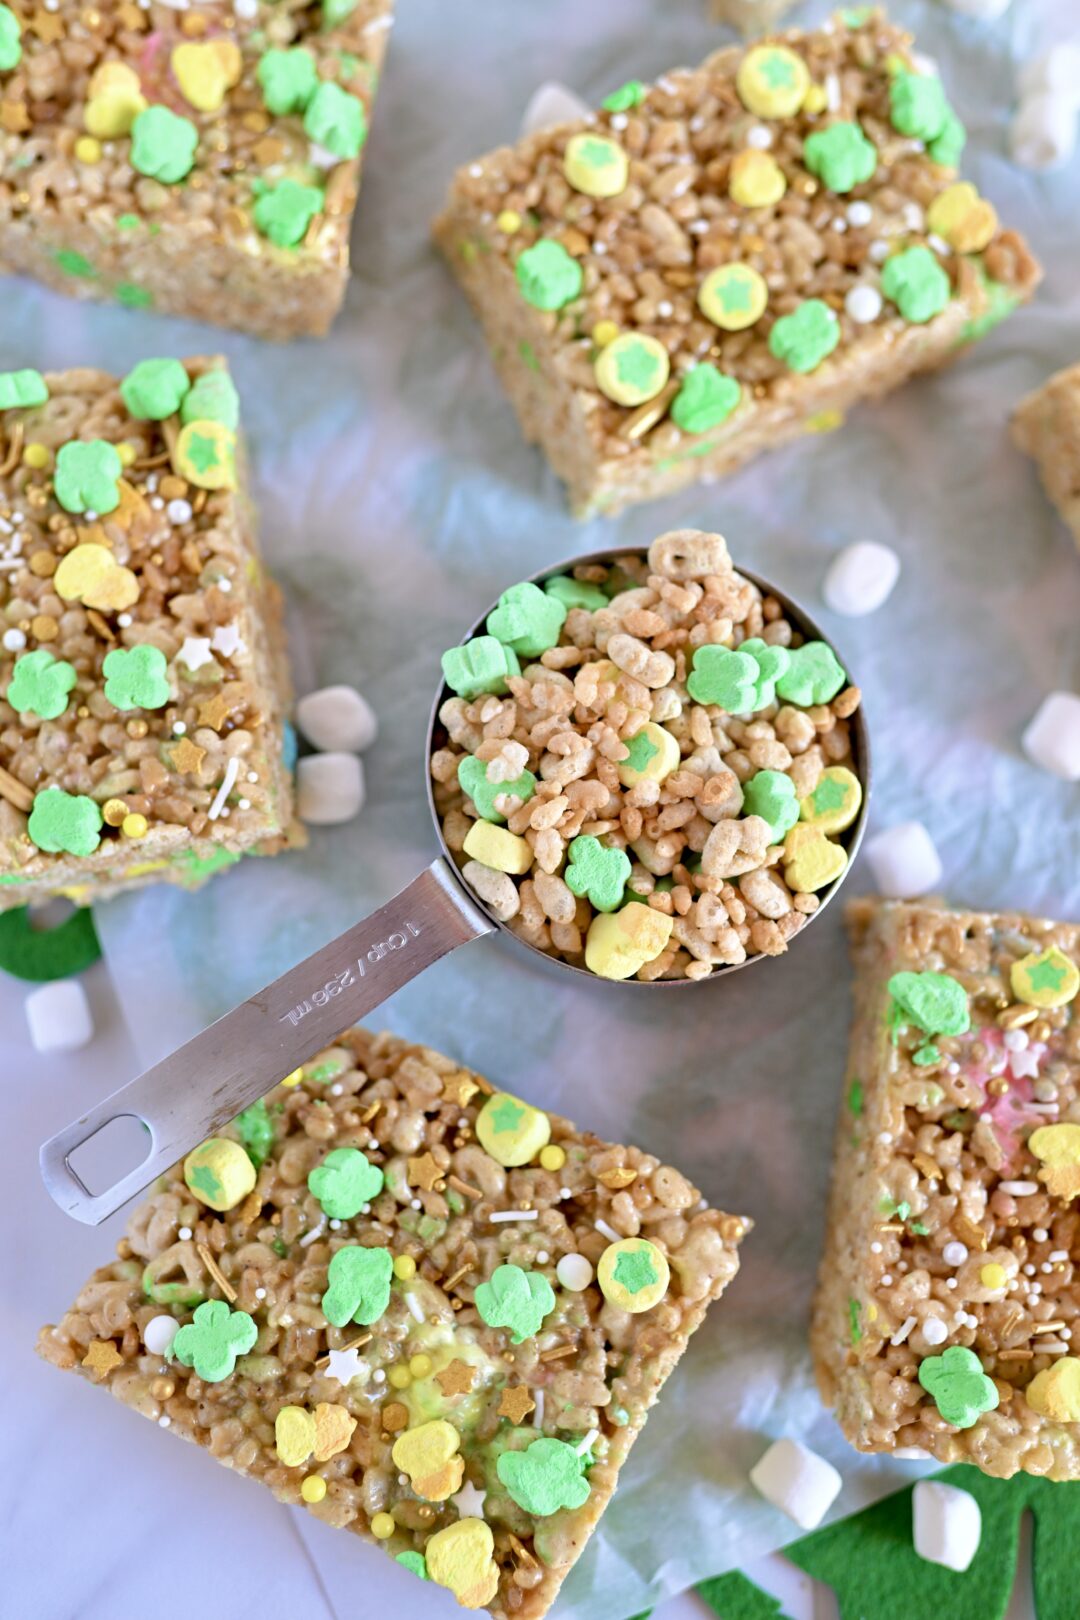 Lucky Charms Marshmallow Rice Krispies squares on parchment paper with a measuring cup filled with lucky charm cereal.